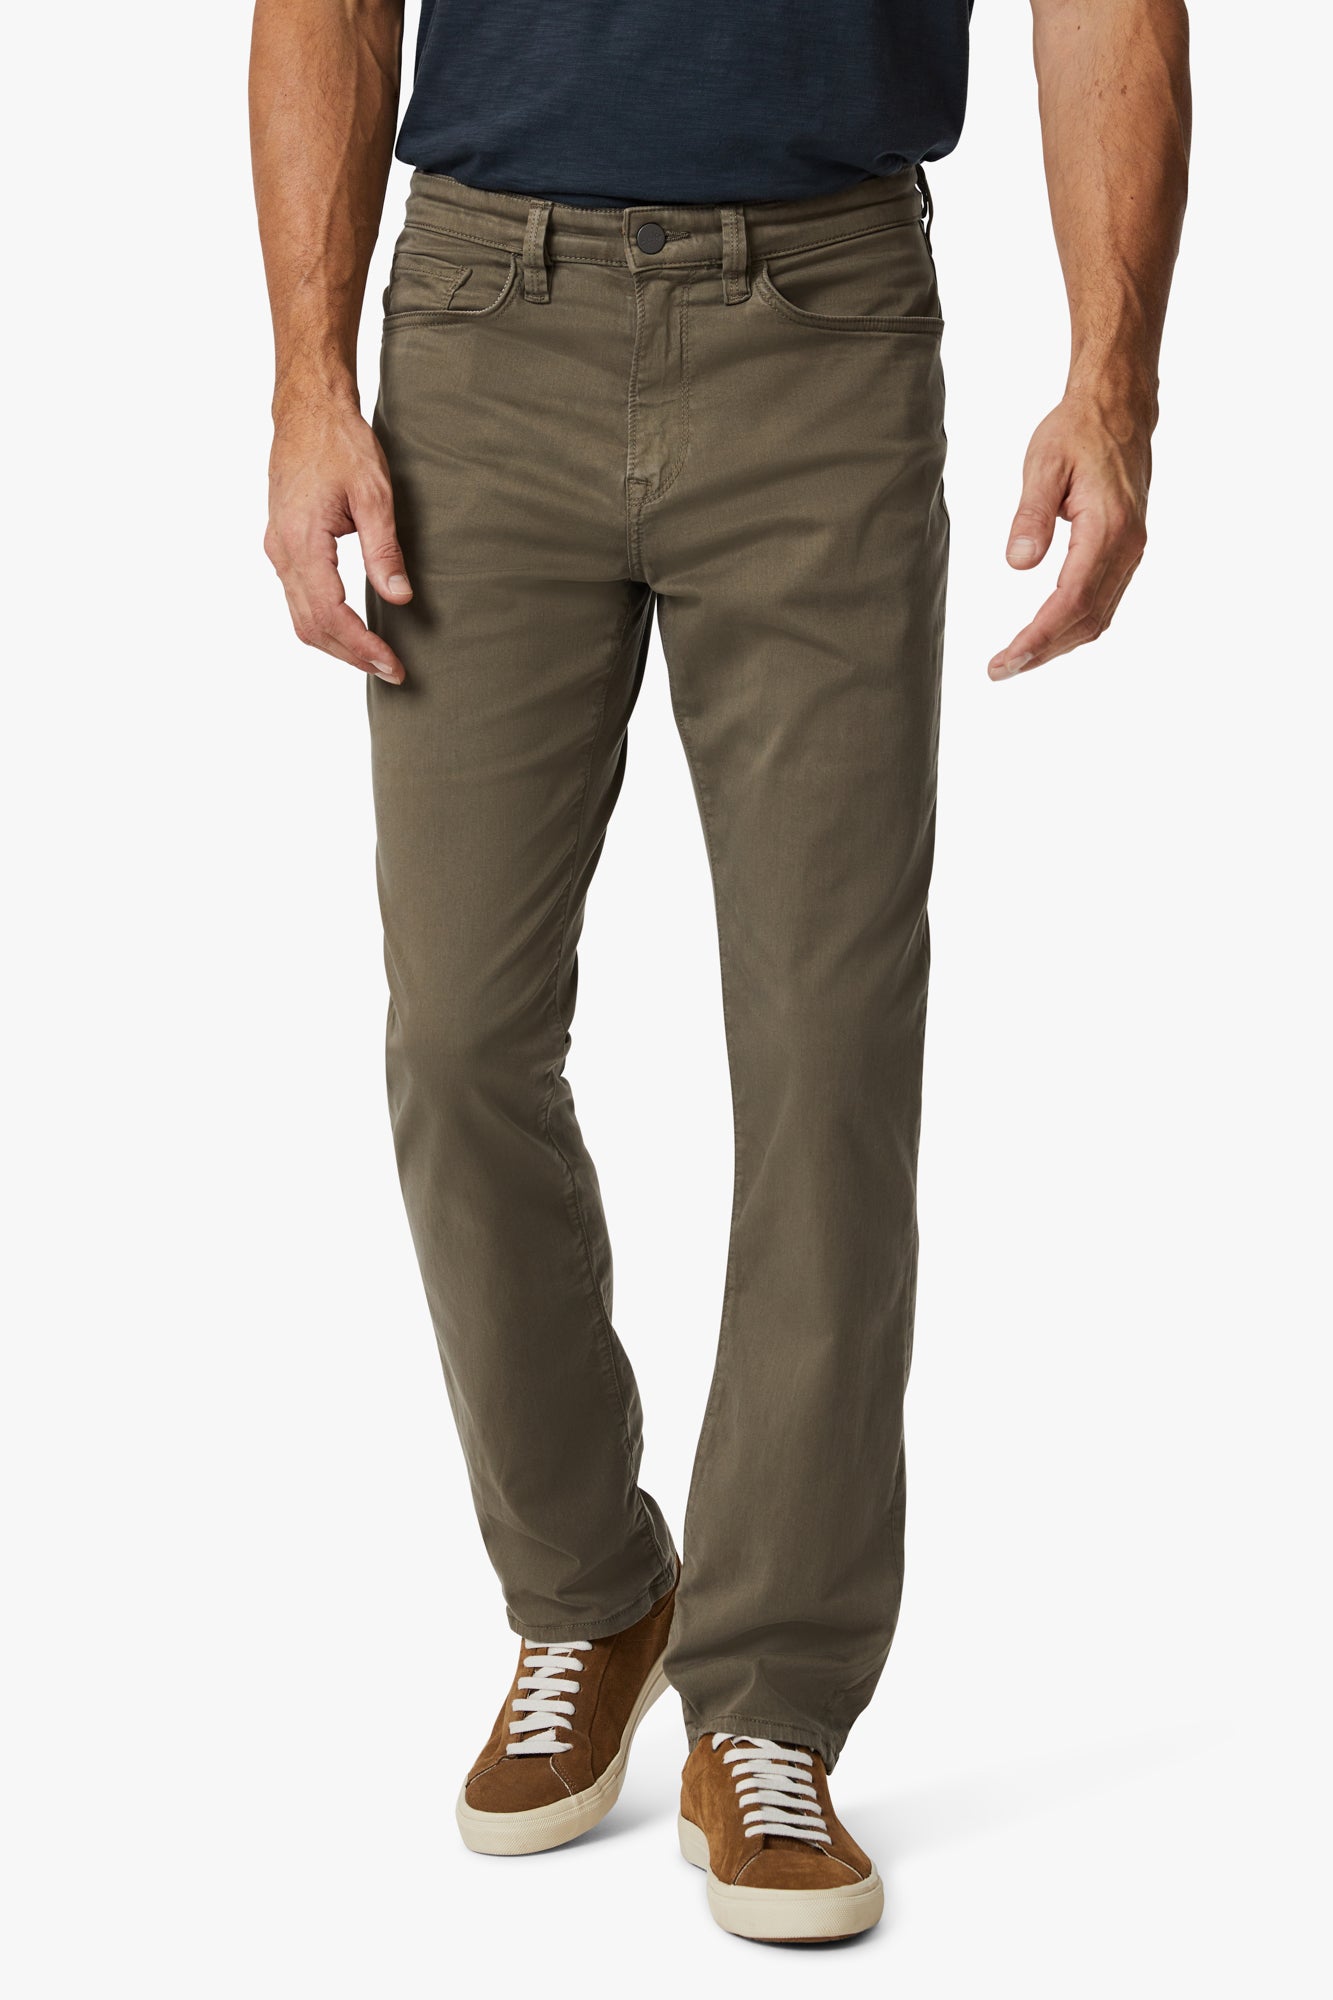 Charisma Relaxed Straight Leg Pants Canteen Twill Image 2